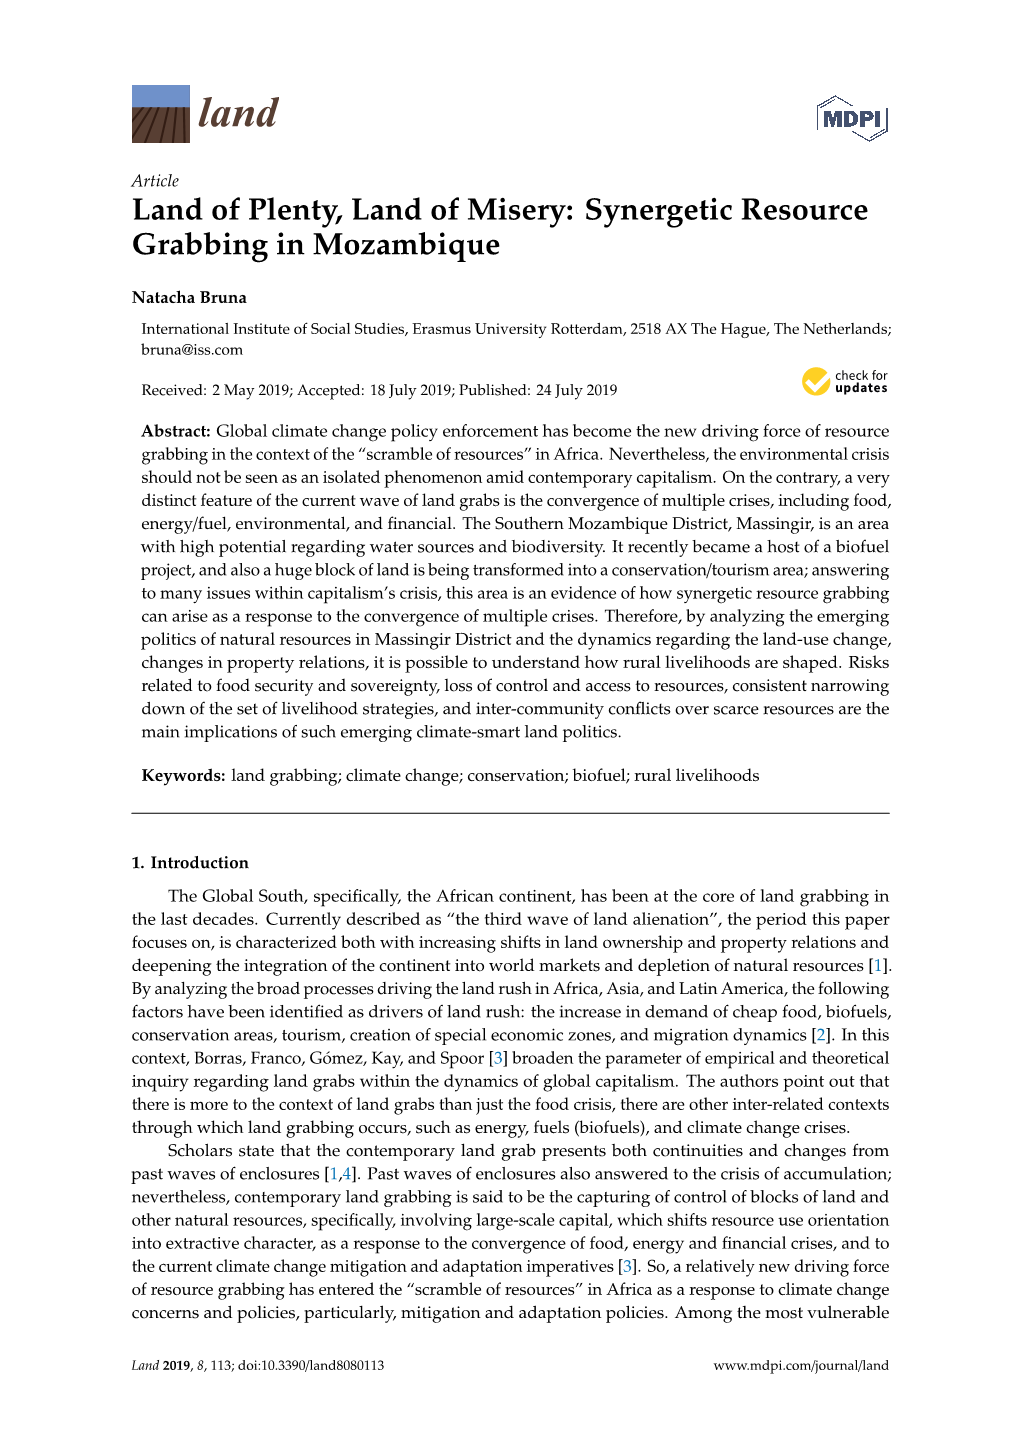 Synergetic Resource Grabbing in Mozambique